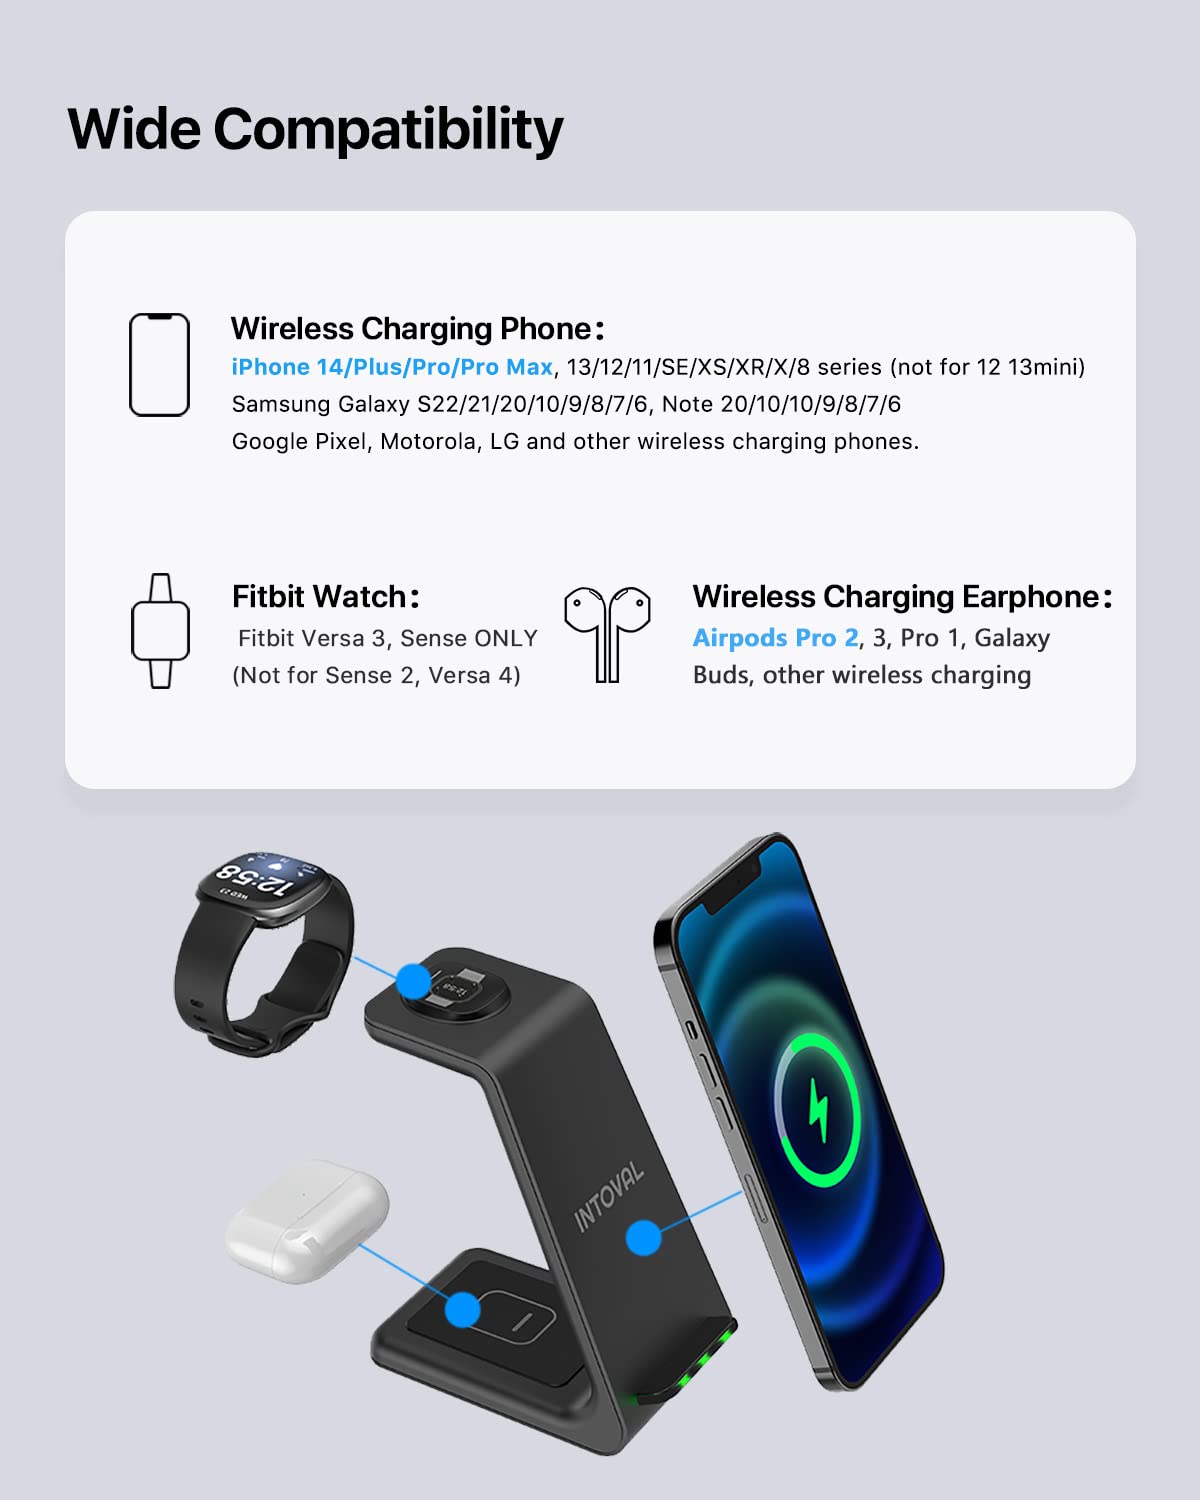 Intoval 3 in 1 Charger, for Fitbit Sense Fitbit Versa 3, iPhones, Samsung Galaxy Note and S Phones, Airpods Pro, Galaxy Buds +/Live and Other Wireless Charging Phones or Earbuds. (V3,White)